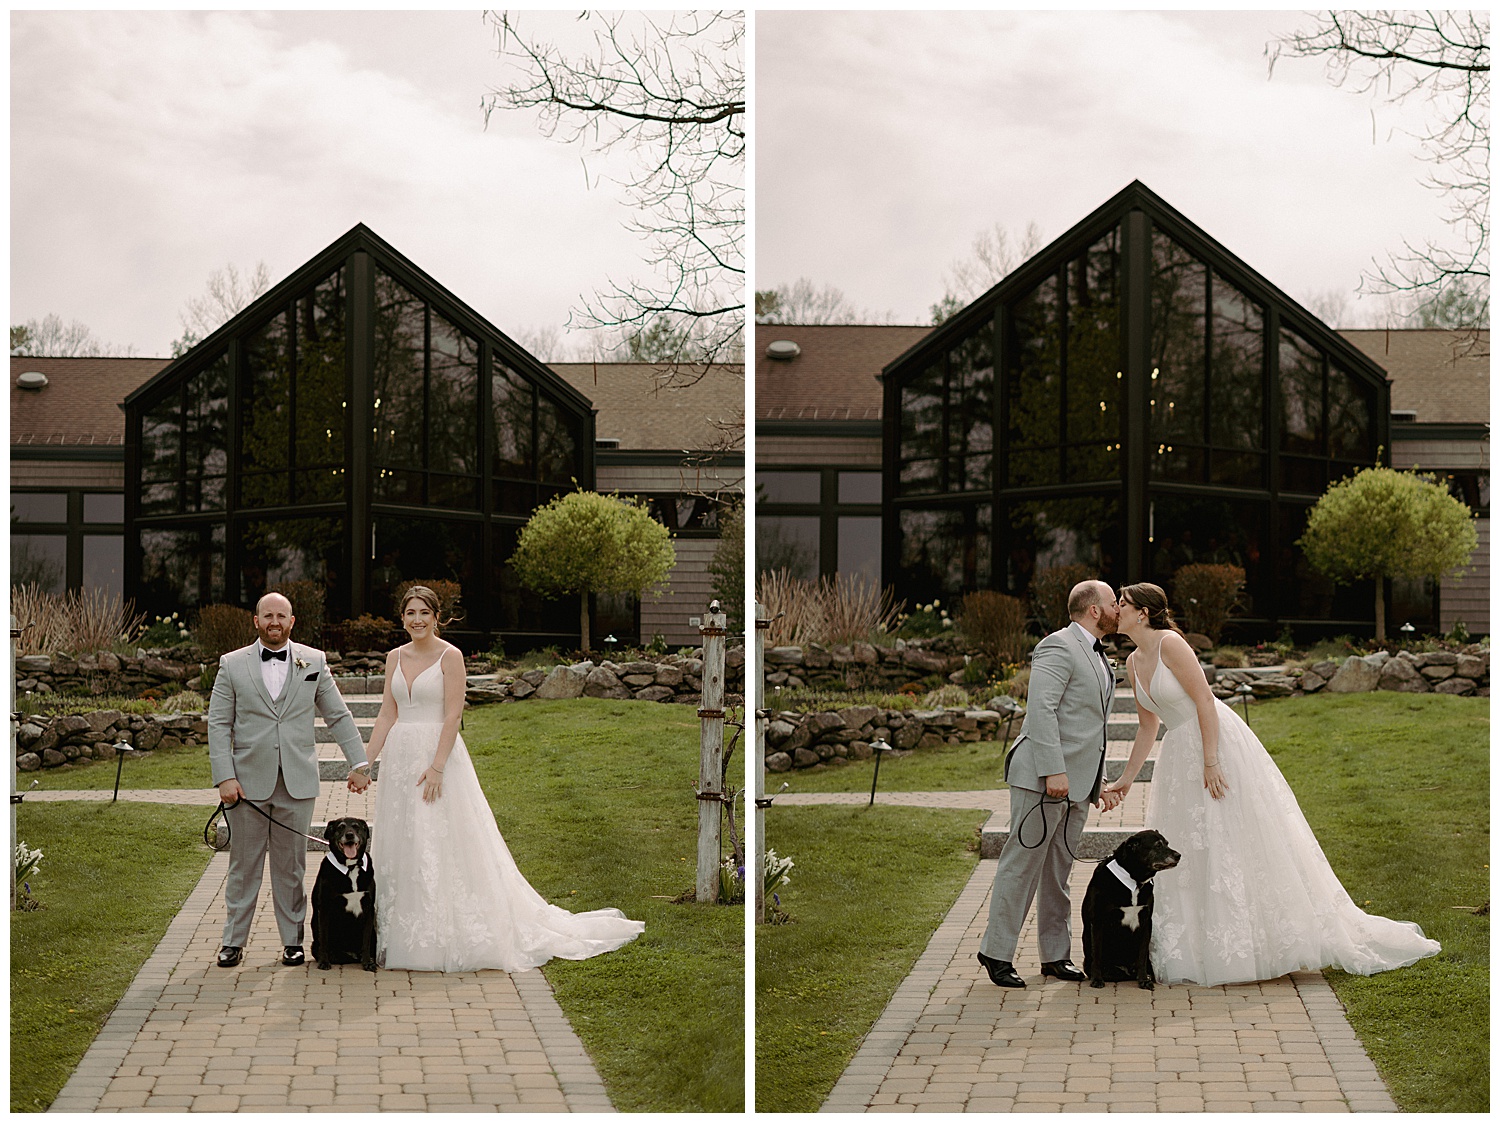 Elegant bride and groom photos in winery vineyards with their dog